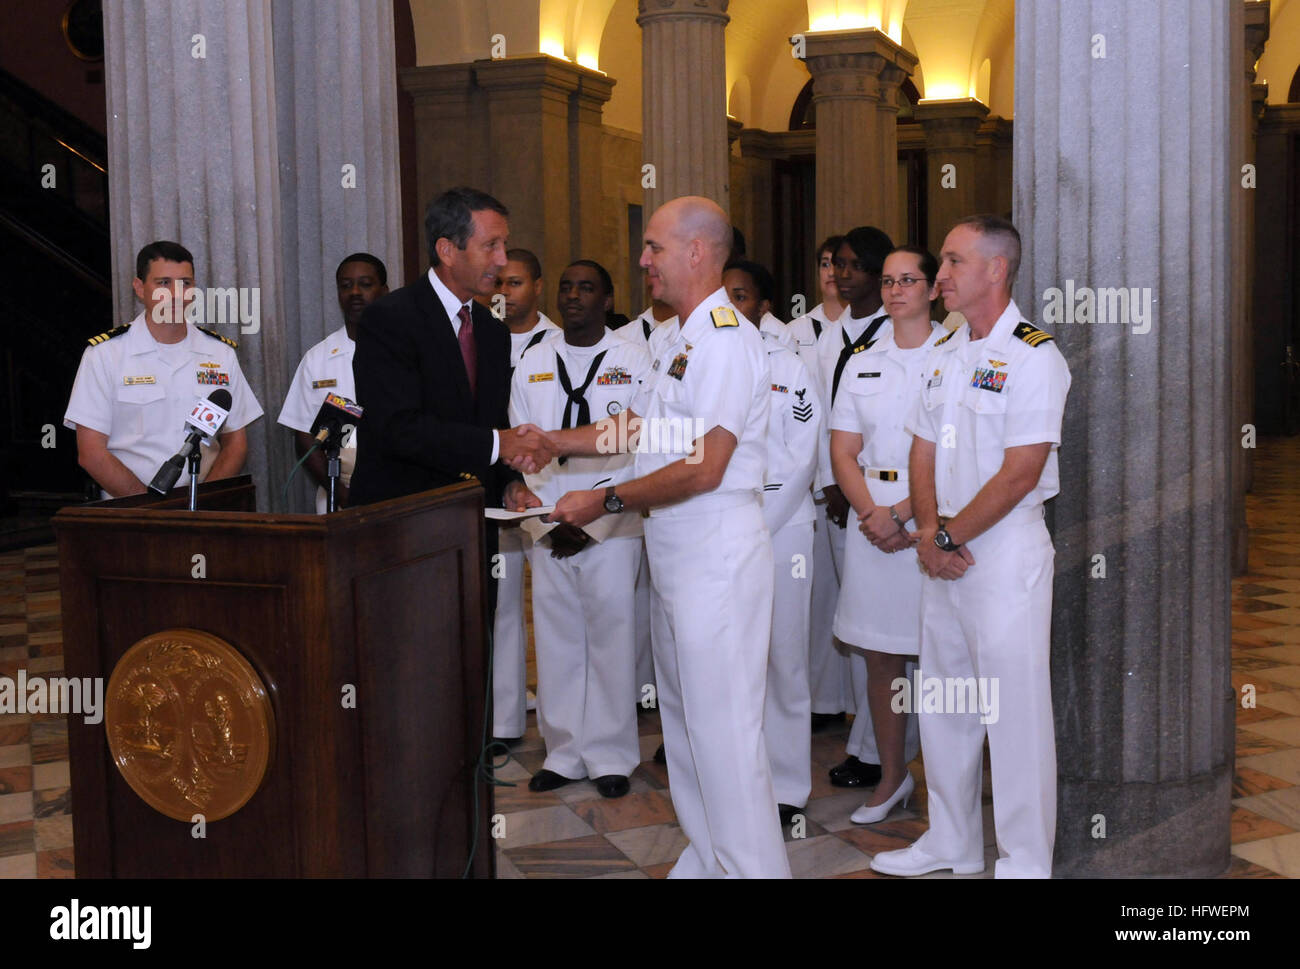 080925-N-2539L-010  COLUMBIA, S.C. (Sept. 25, 2008) Rear Adm. John Goodwin, commander, Naval Air Forces Atlantic, accepts from South Carolina Governor Mark Sanford, a certificate proclaiming this week Columbia Navy Week. Sailors from Navy Recruiting District Raleigh and Navy Operational Support Center Columbia participated in a media event in the State House Rotunda with Goodwin and Sanford. Navy Weeks are designed to raise awareness in metropolitan areas that do not have a significant Navy presence. (U.S. Navy photo by Chief Mass Communication Specialist Hugh C. Laughlin/Released) US Navy 080 Stock Photo